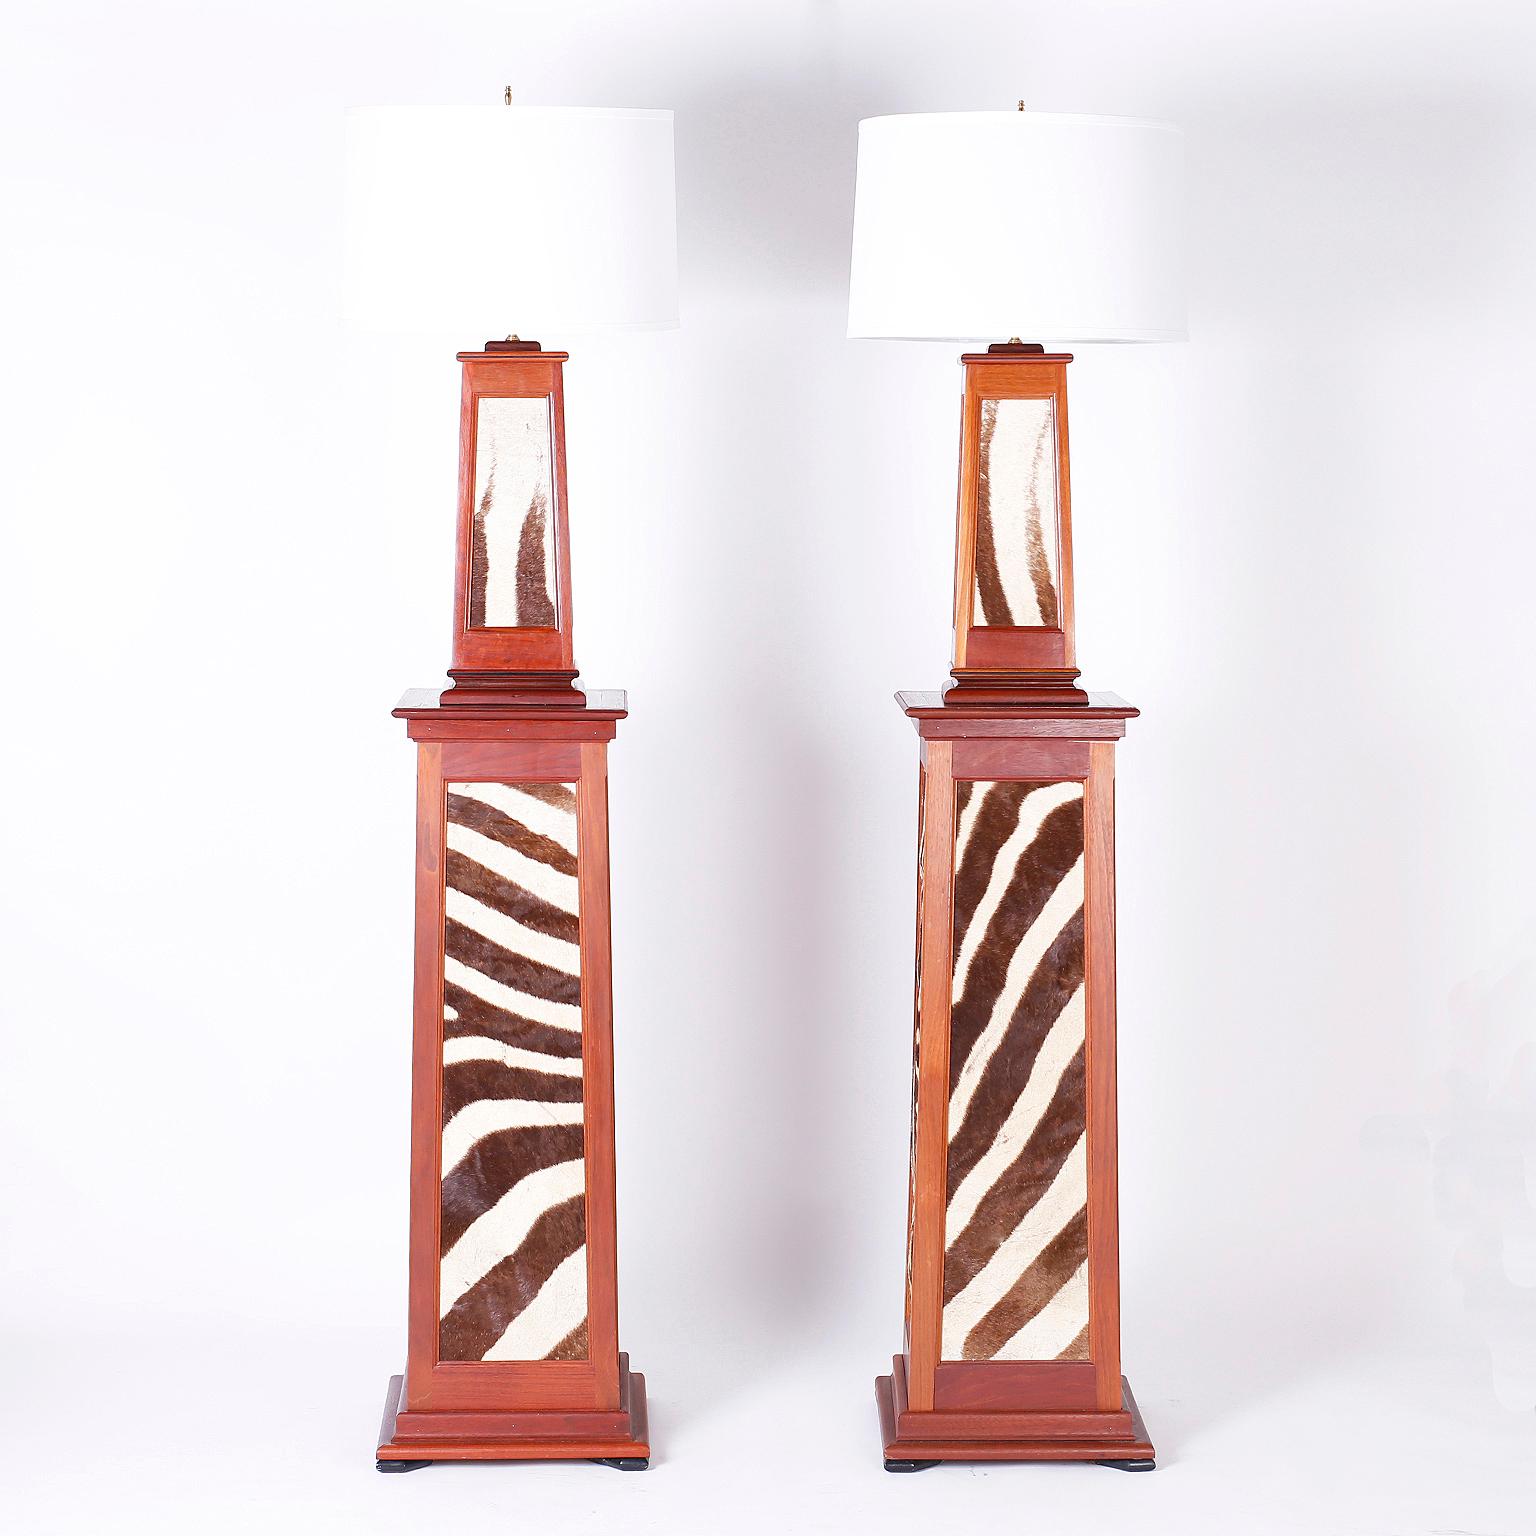 Pair of British Colonial floor lamps with a Classic tapered form custom crafted in mahogany with exotic zebra hide panels all around. Available with linen or the original lambskin shades.